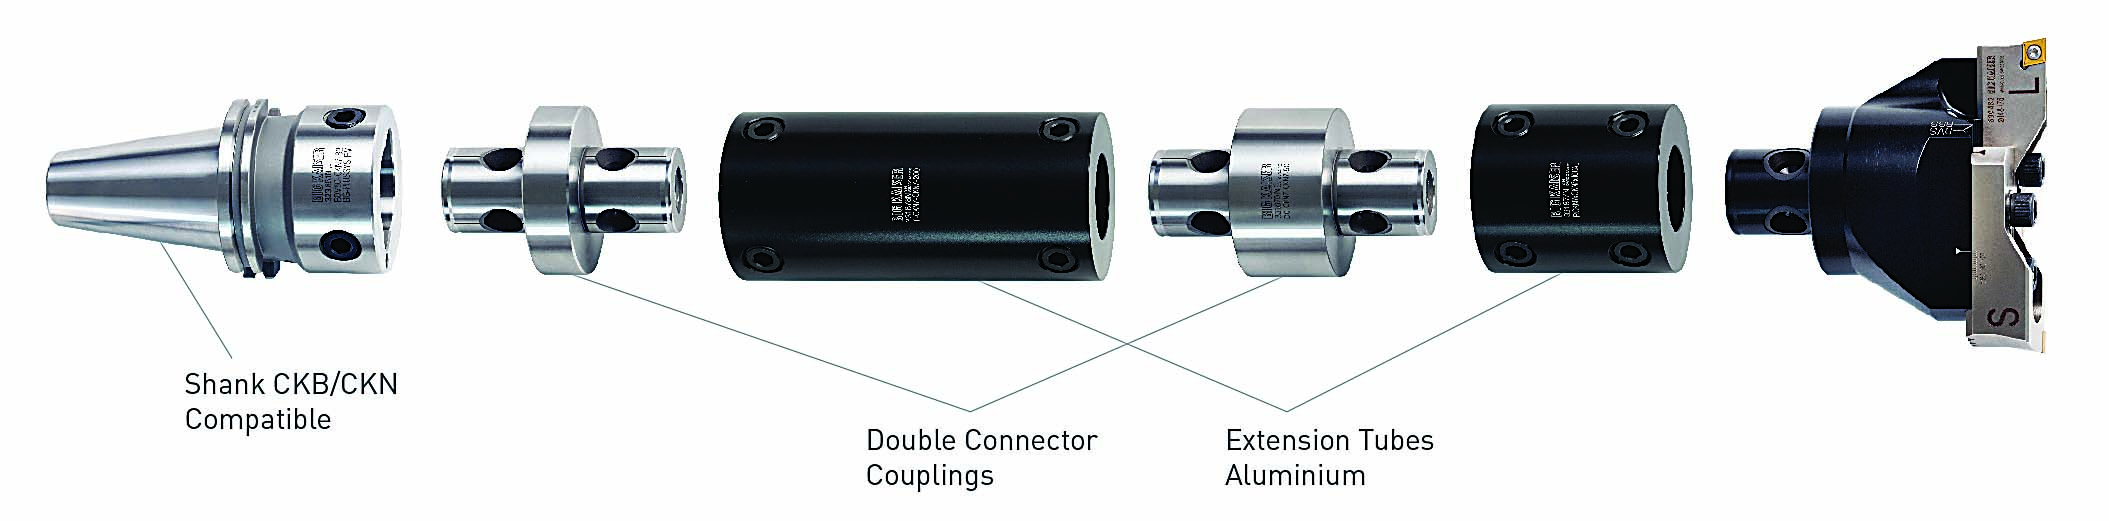 The BIG KAISER CKN connection is the strongest tool connection for lightweight tools. The double connector coupling enables the use of aluminum extension tubes, which results in a considerable weight reduction for larger tools.